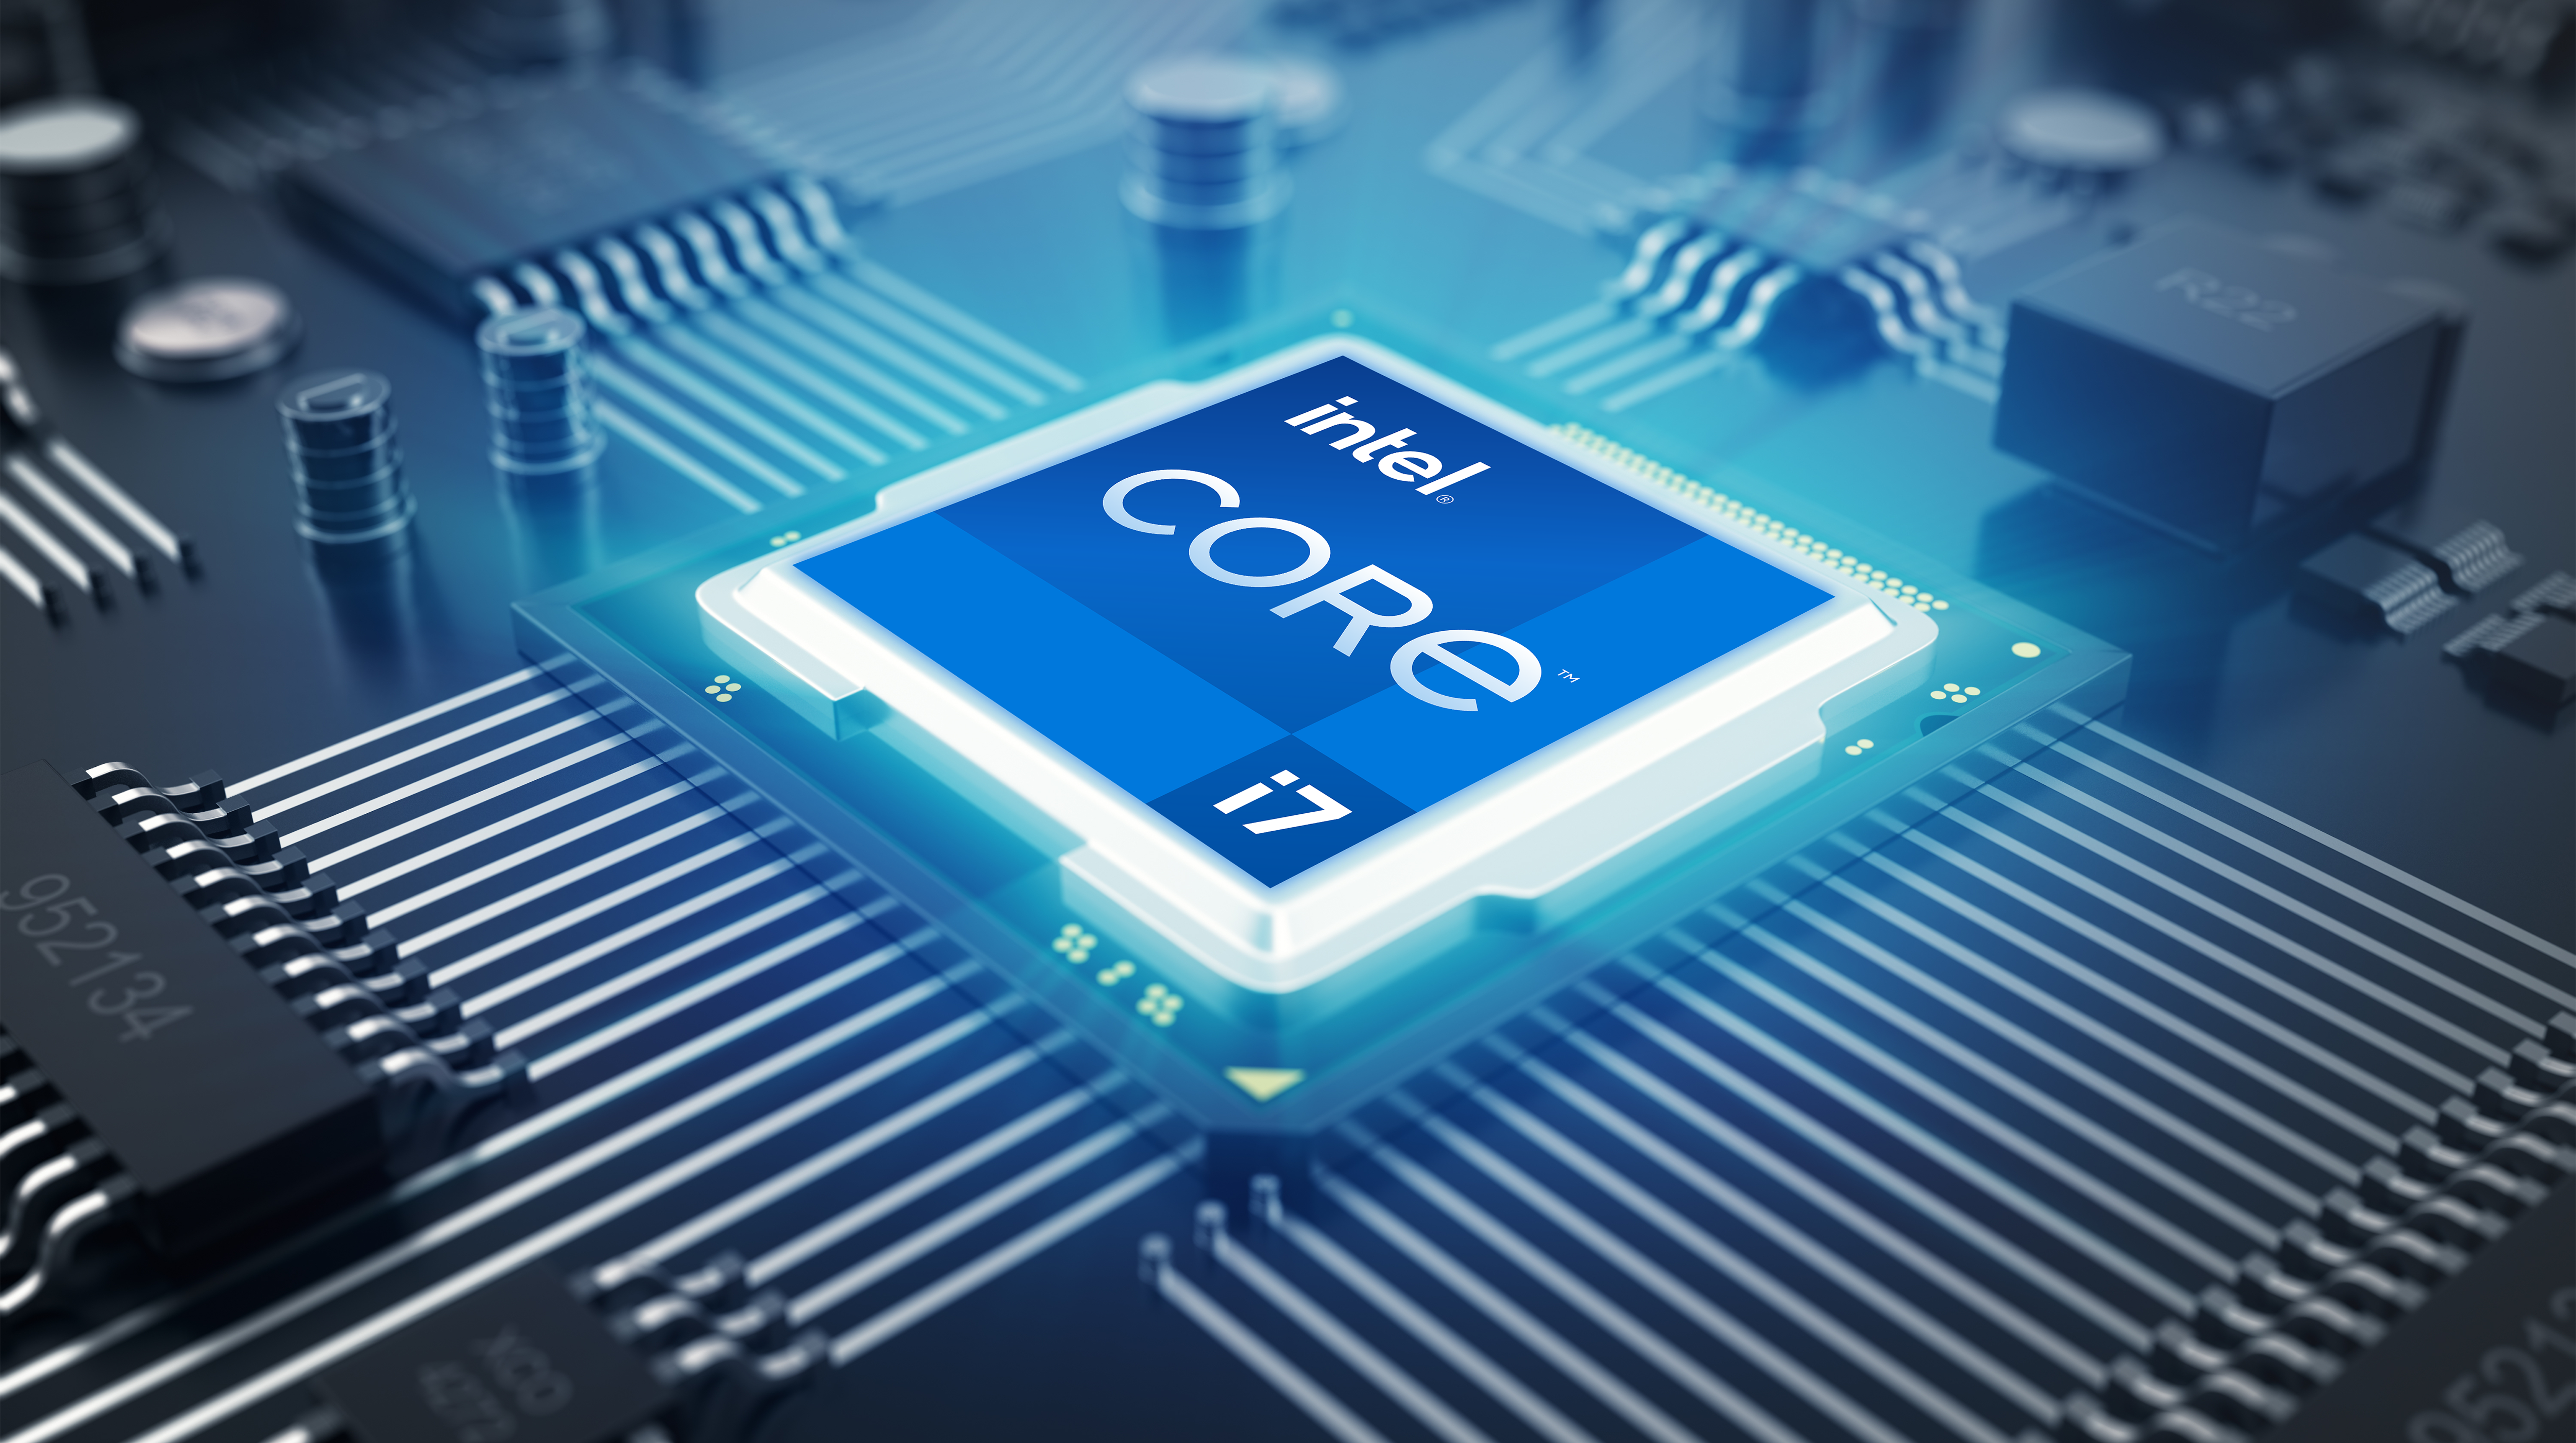 Circuit board. Technology background. Central Computer Processors CPU concept. Motherboard digital chip. Tech science background. Integrated communication processor. 3D Rendering; Shutterstock ID 746807584; Purchase Order: -